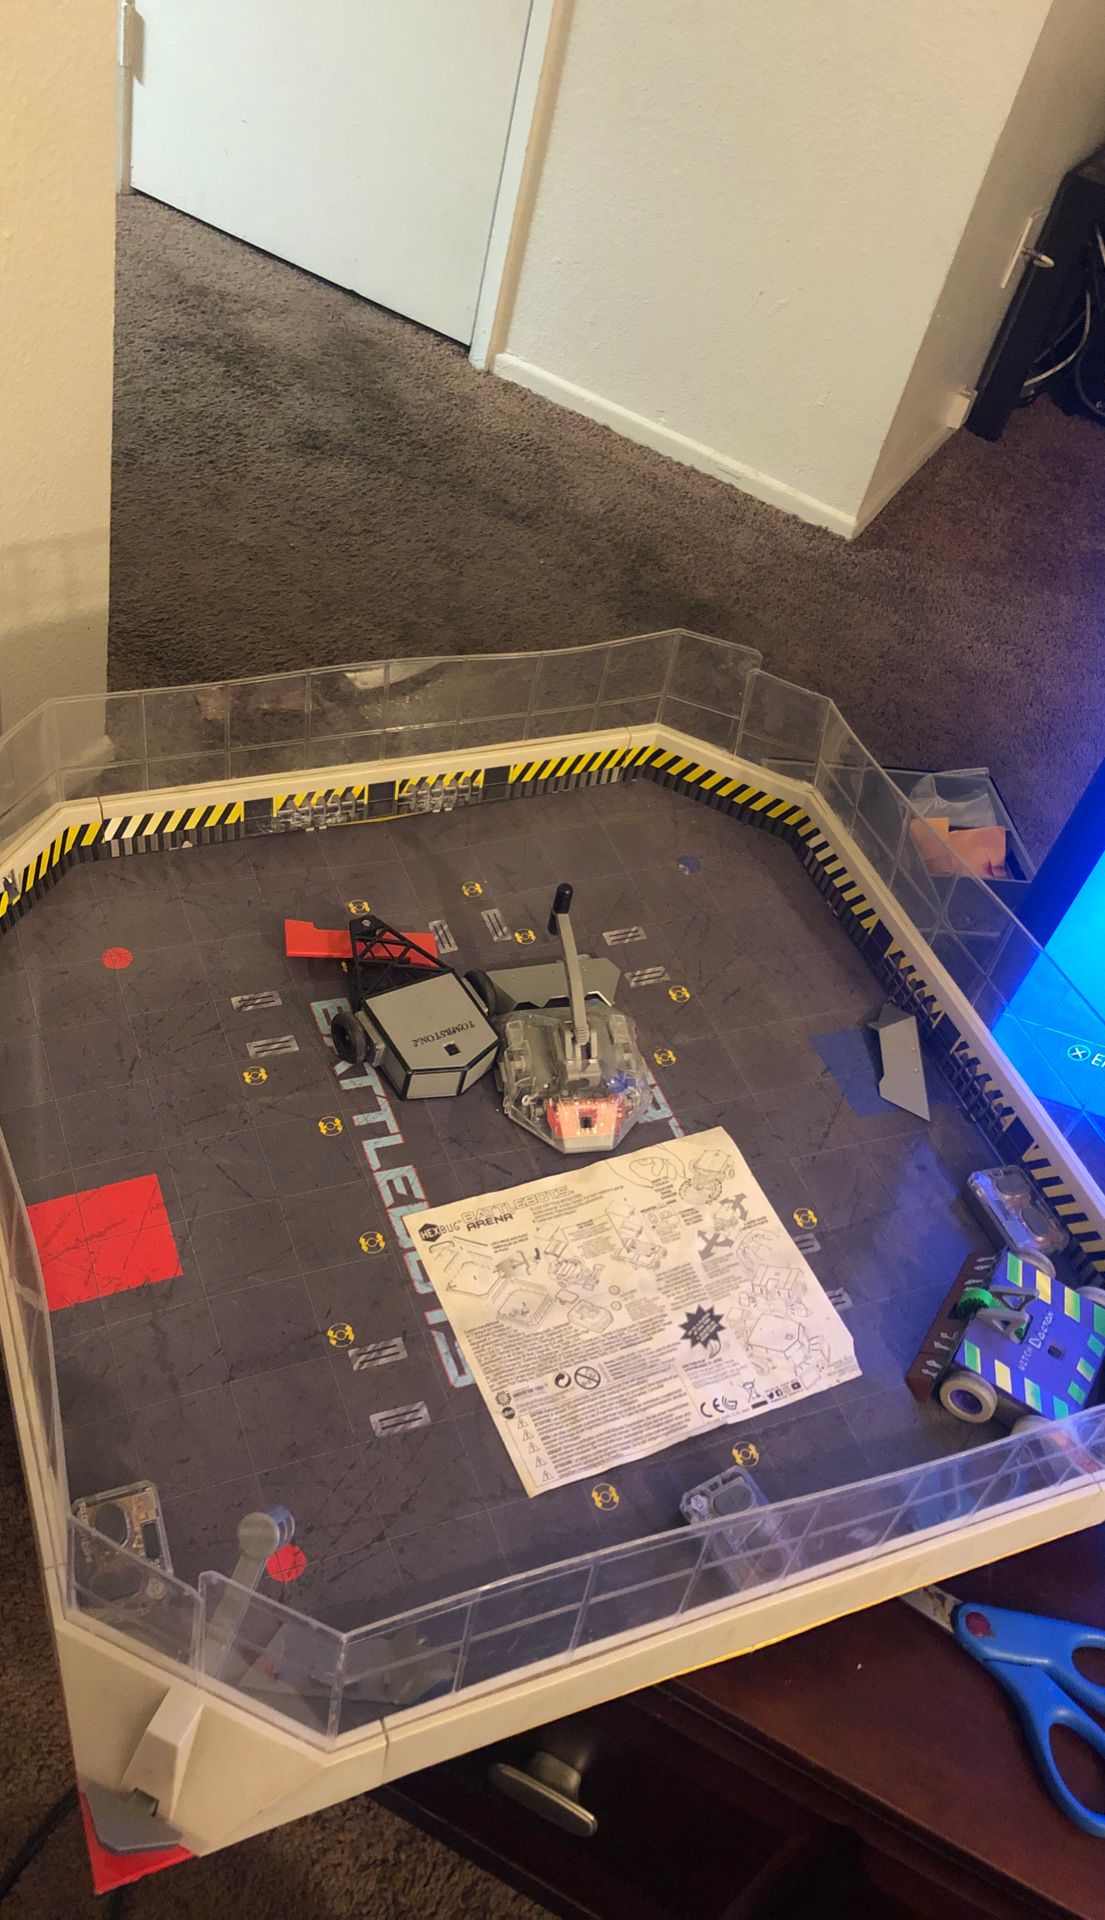 Battle bots arena board with 3 bits and remotes